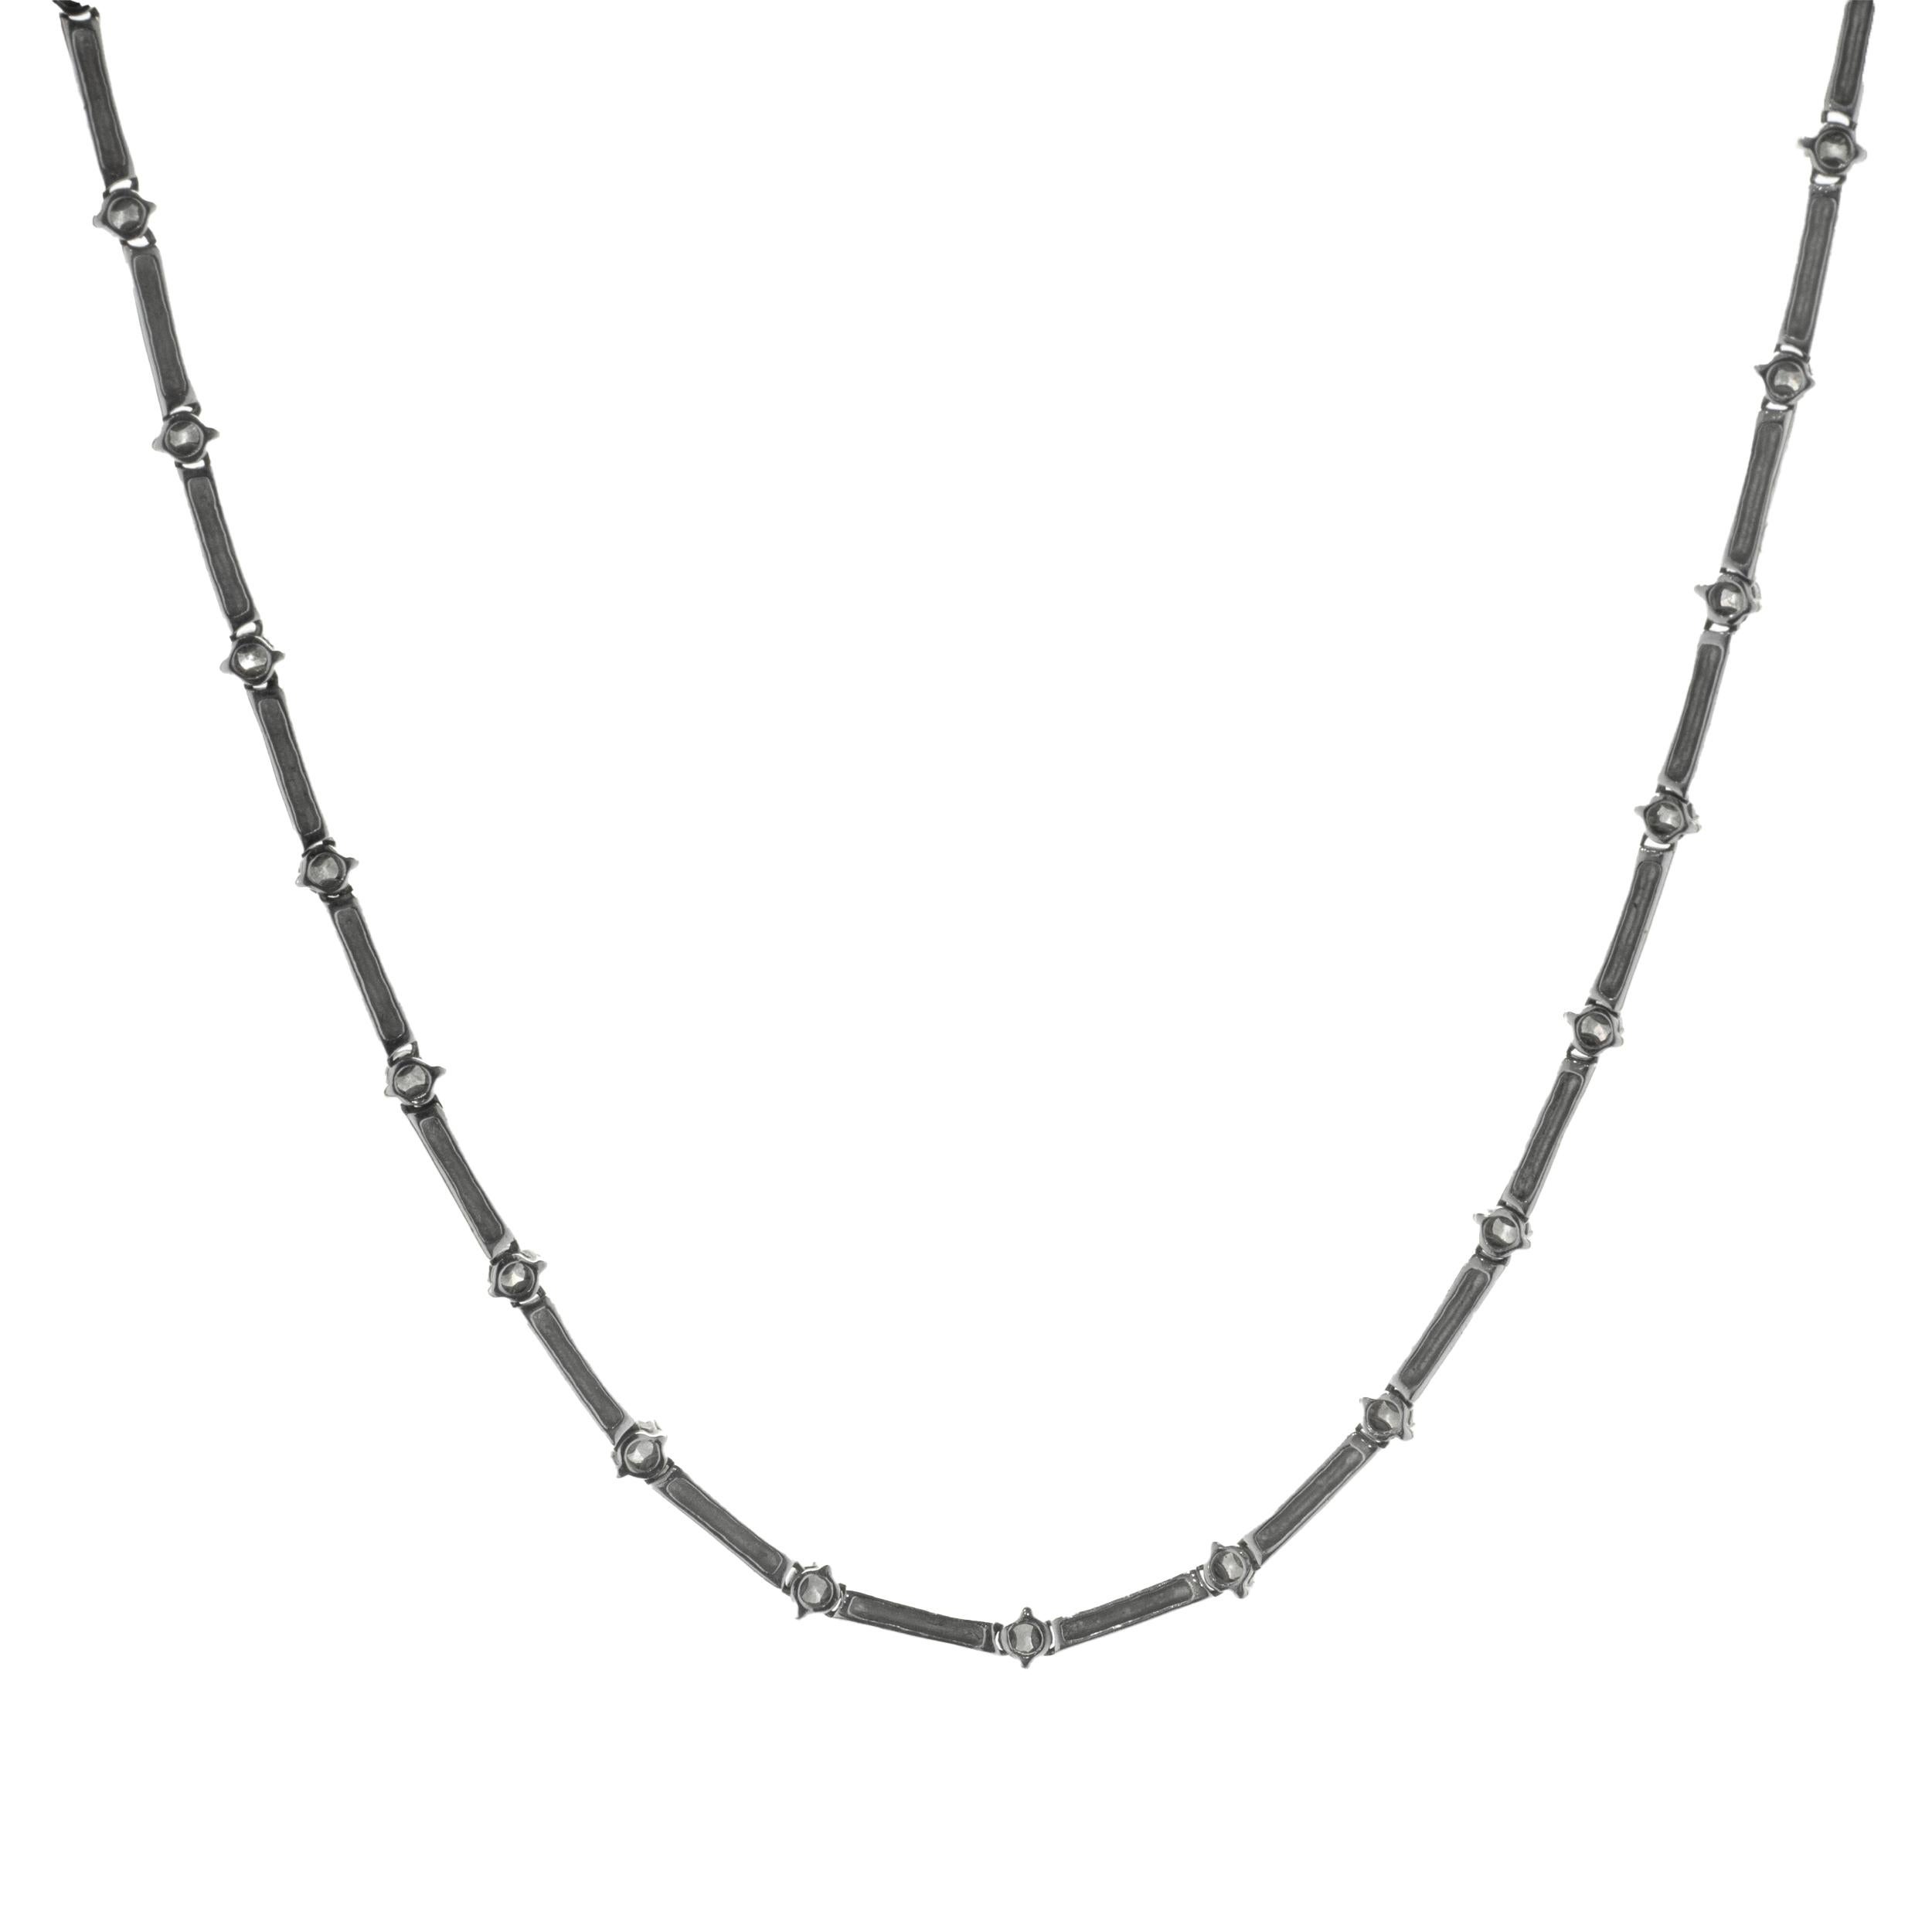 Designer: custom design
Material: 14K white gold 
Diamond: 24 round brilliant cut = .84cttw
Color: G
Clarity: SI1
Dimensions: necklace measures 16.5-inches in length
Weight: 14.35 grams
